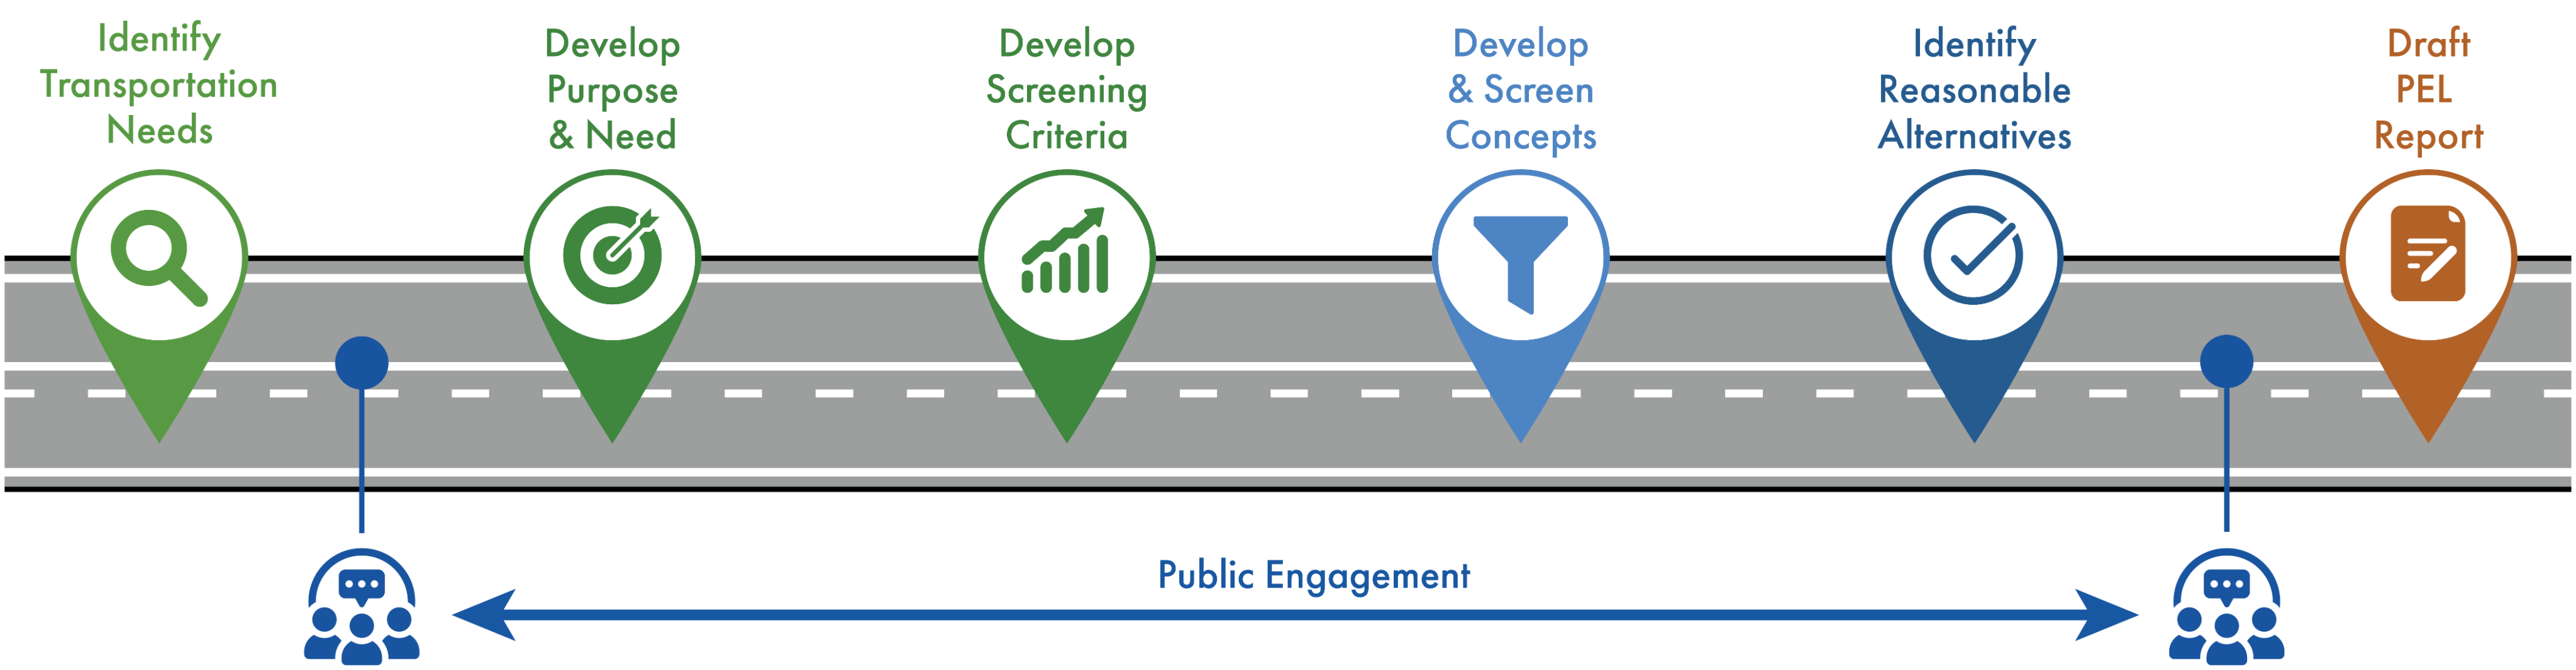 Planning and Environmental Linkages (PEL) Study Process. Steps include identifying transportation needs, developing purpose and need, developing screening criteria, developing and screening concepts, identifying reasonable alternatives, and drafting PEL report.